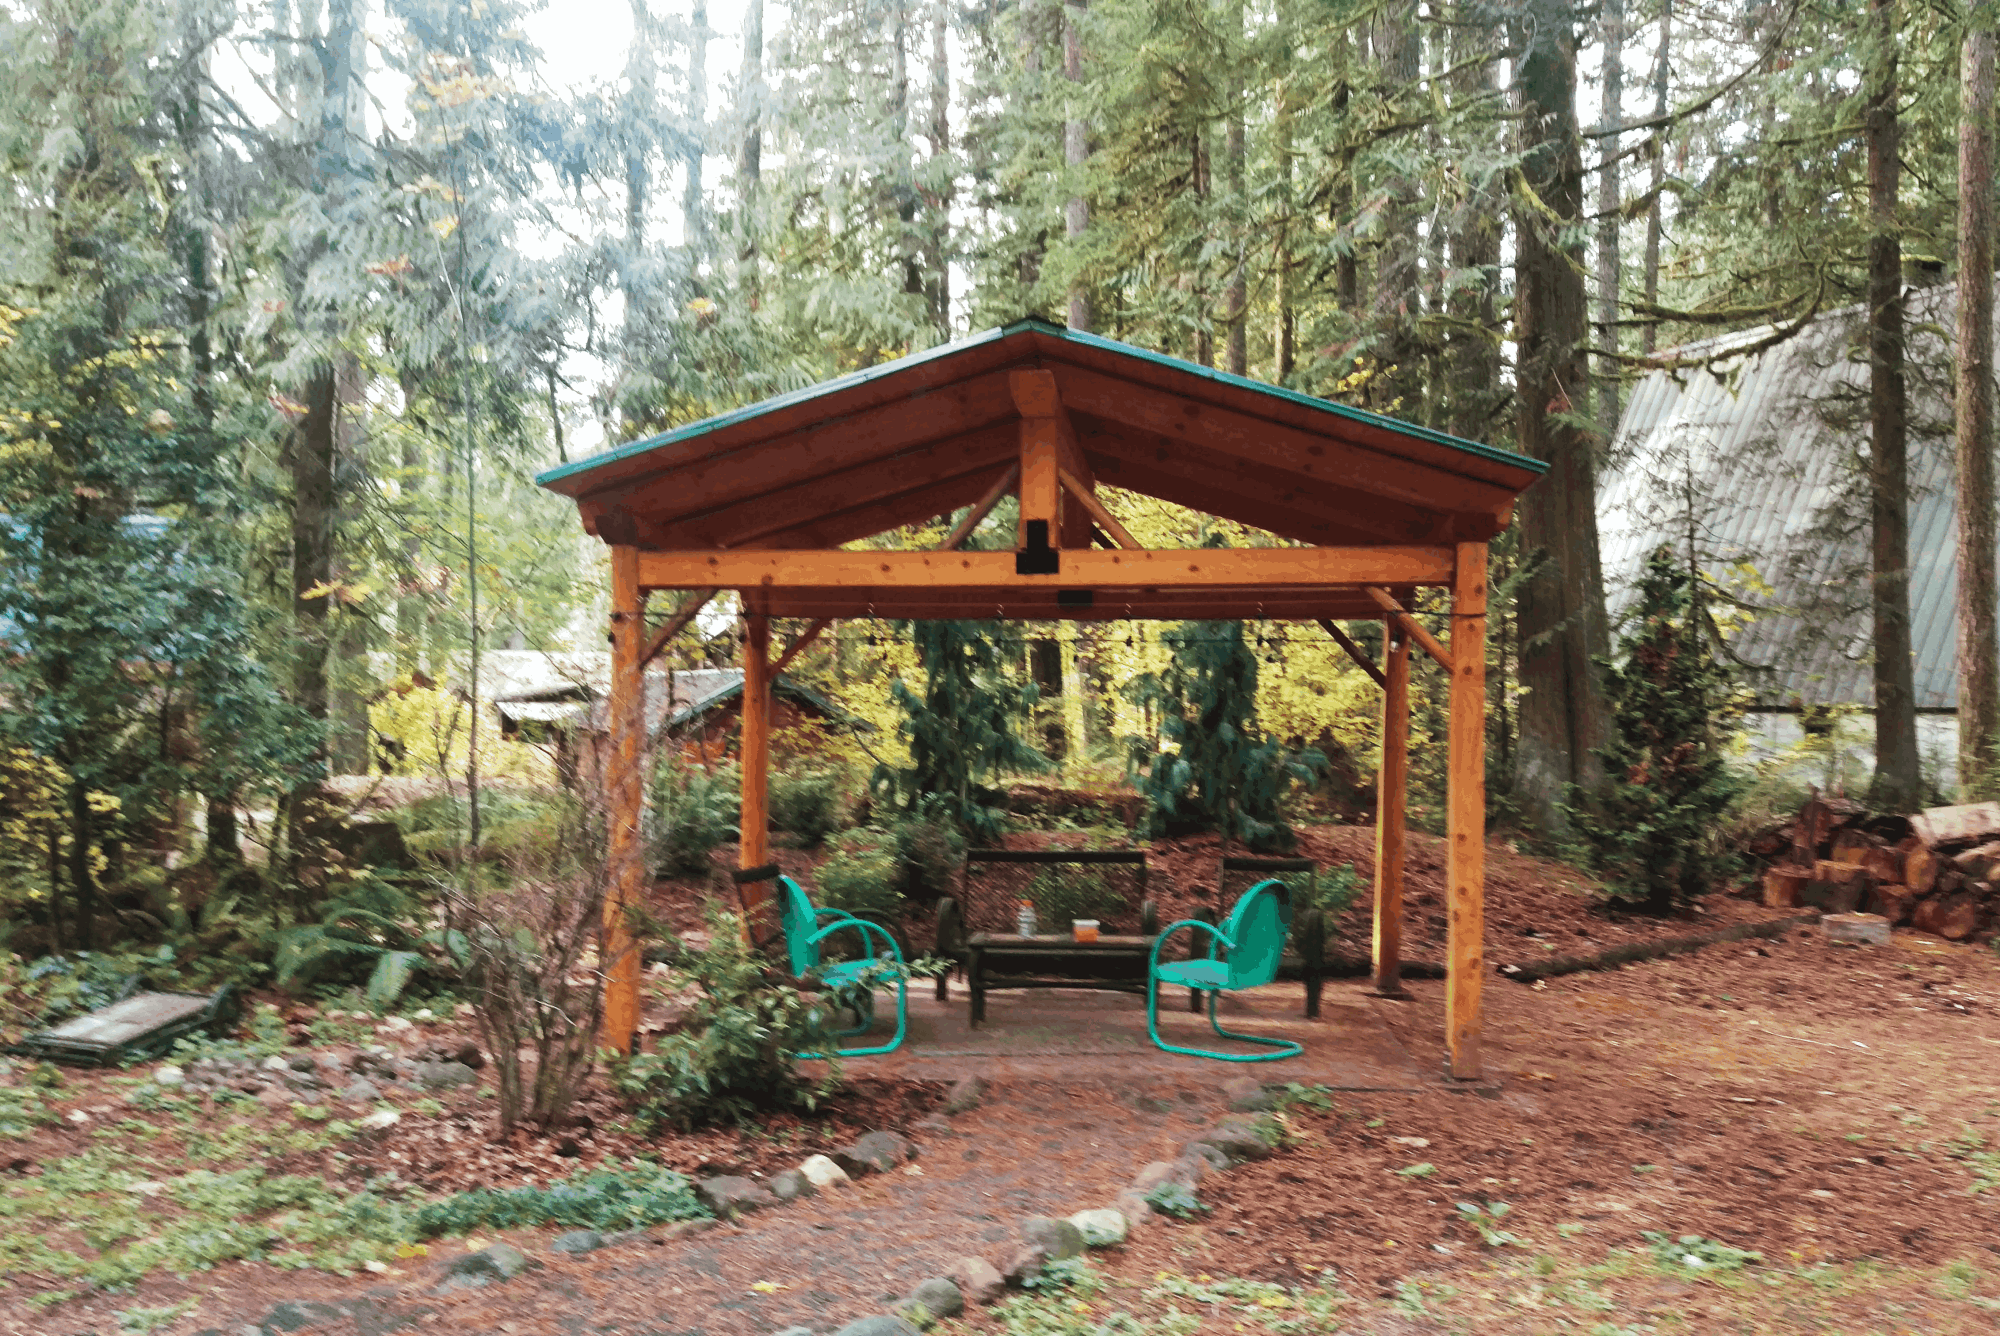 You can see the forest and the trees through this beautiful outdoor shelter.